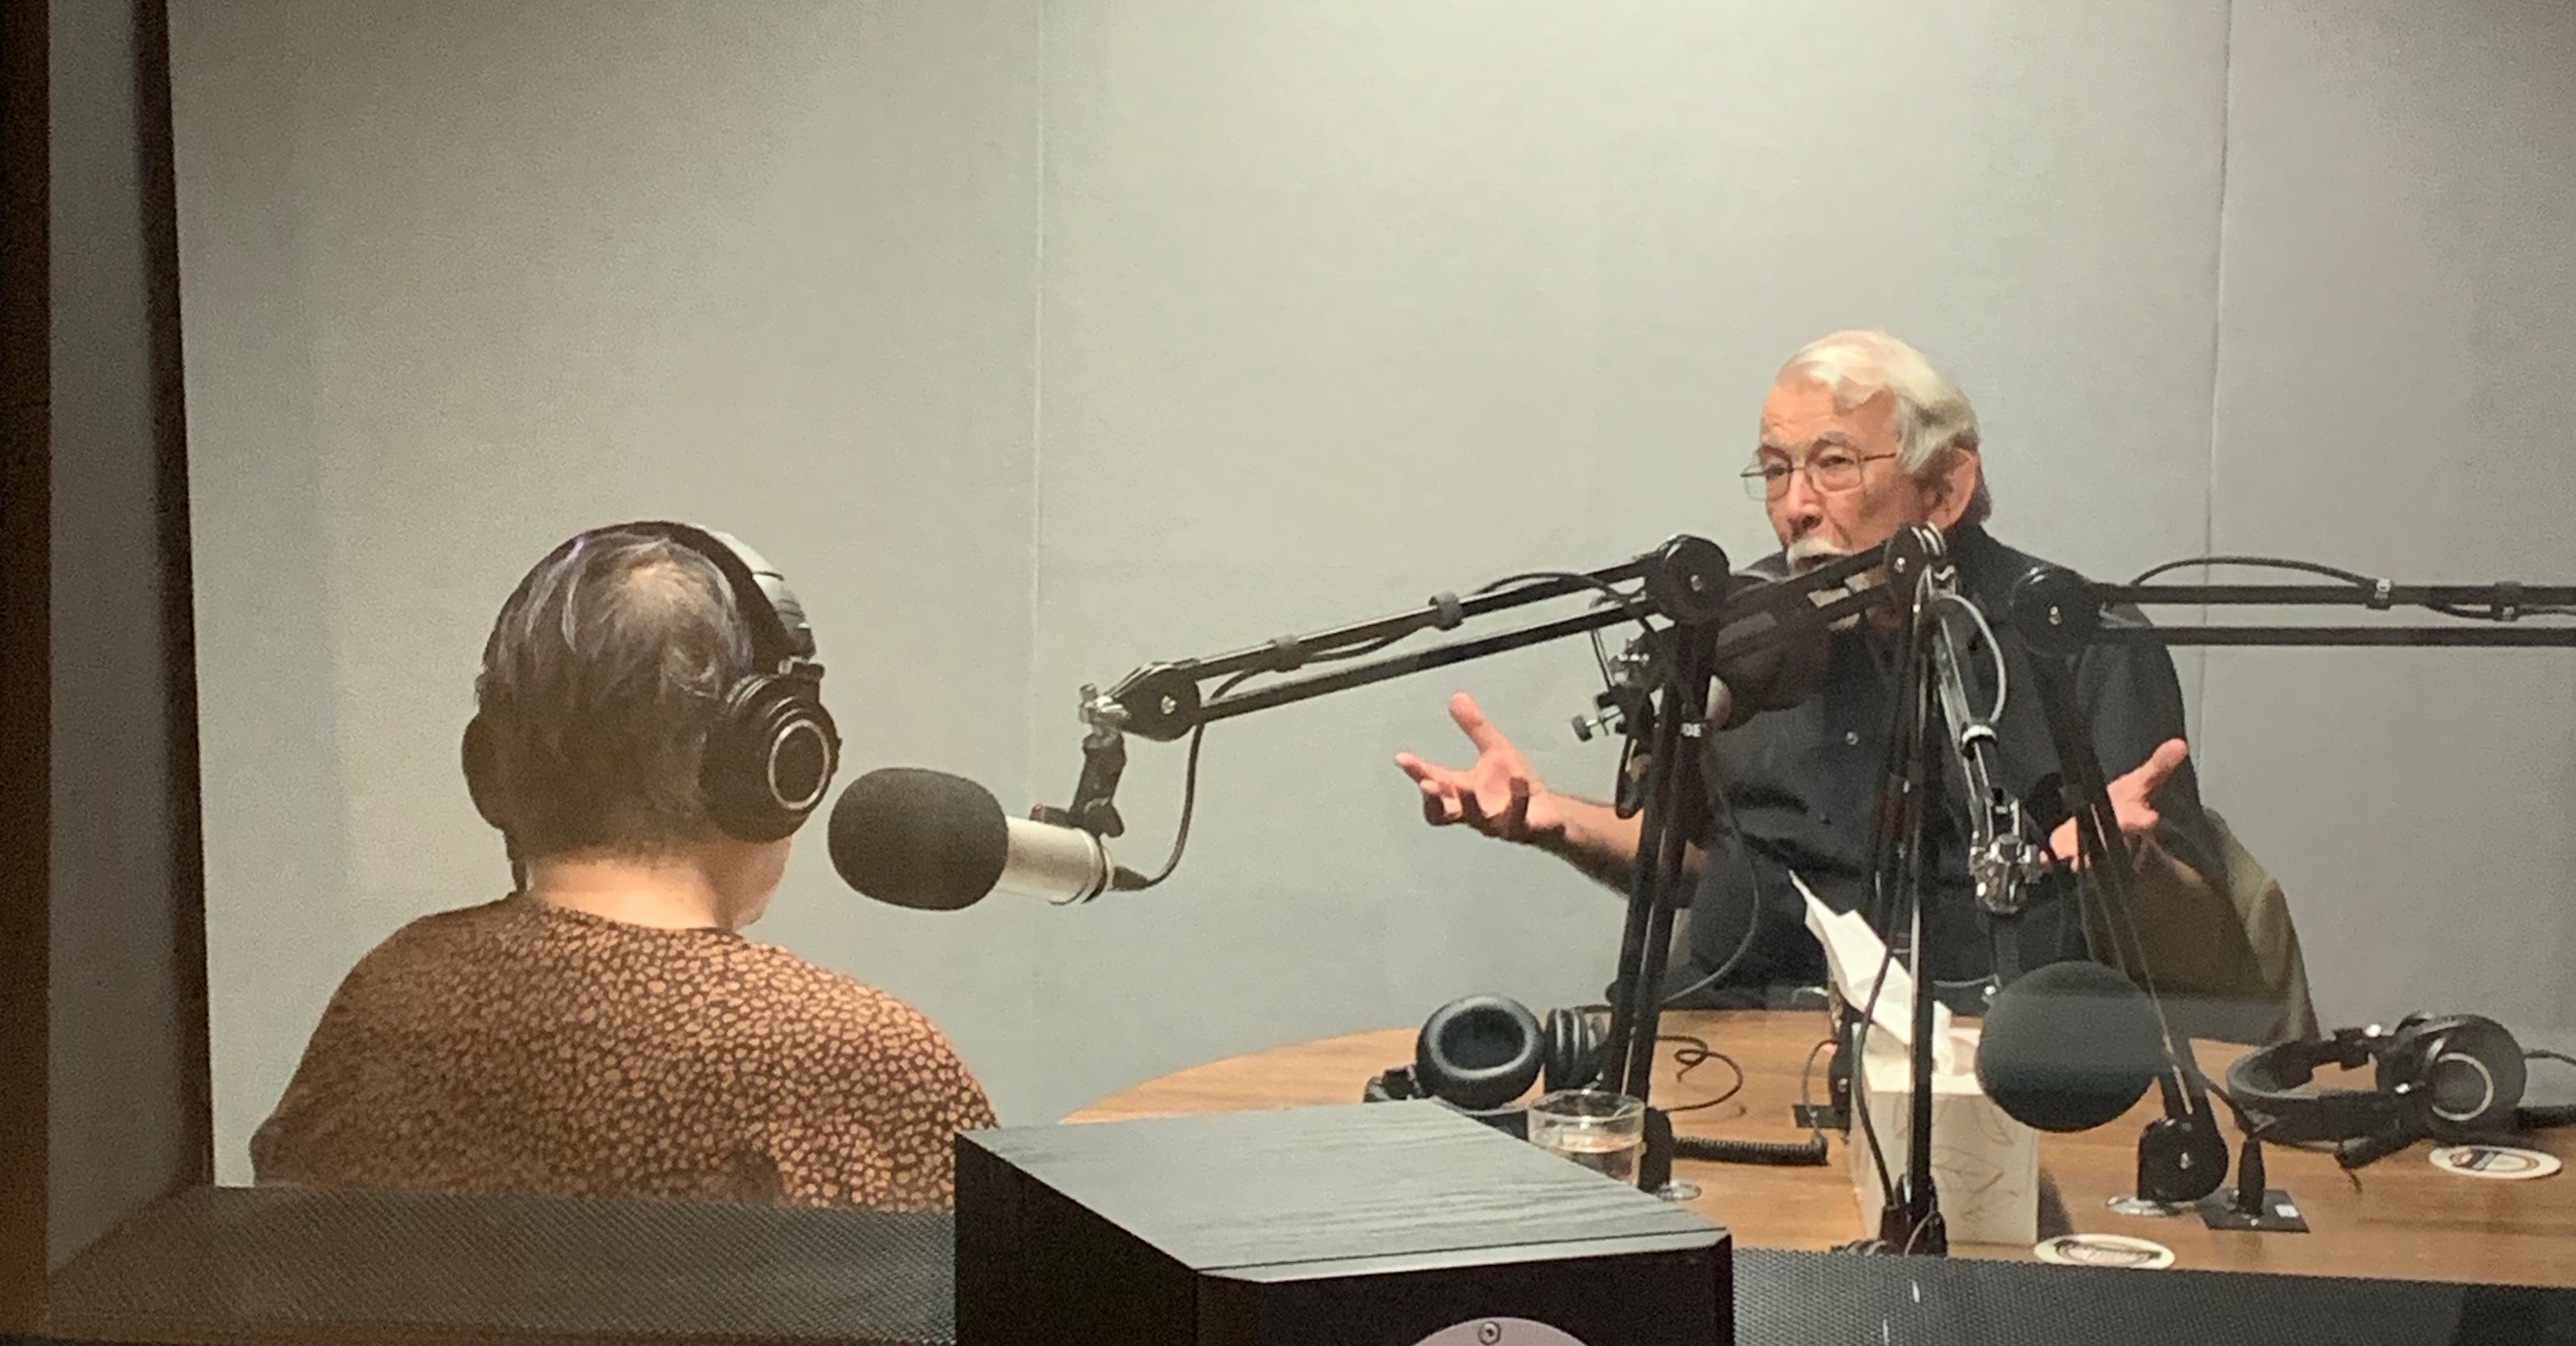 Photo of Sir Professor Thomas Blundell recording the 'Eavesdrop on Experts' podcast with Dr Andi Horvath